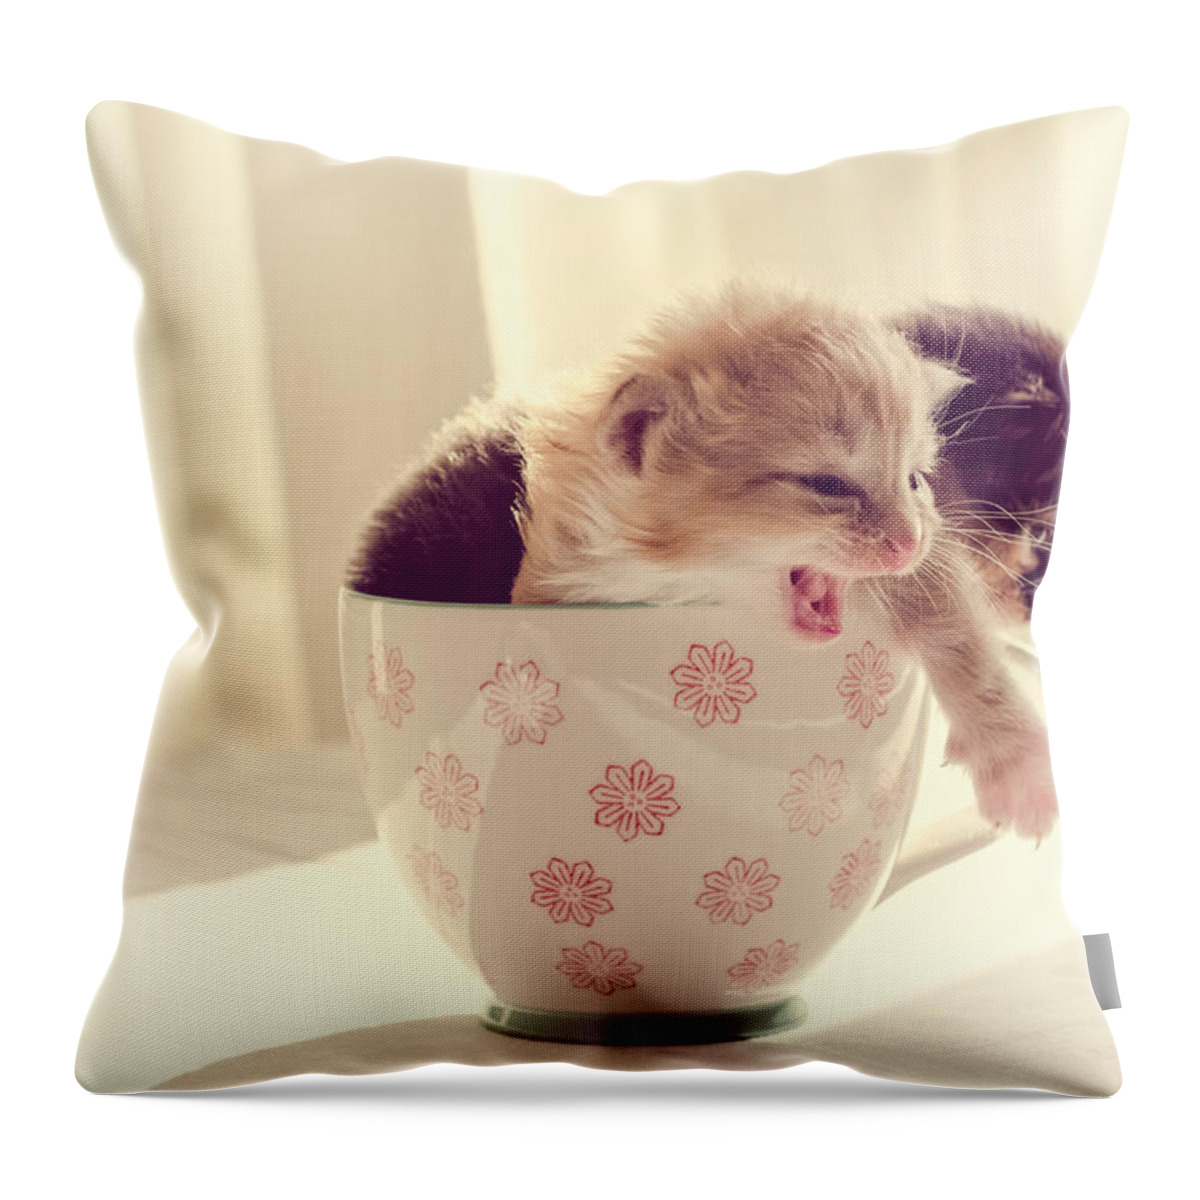 Two Throw Pillow featuring the photograph Two Cute Kittens in a Cup by Spikey Mouse Photography